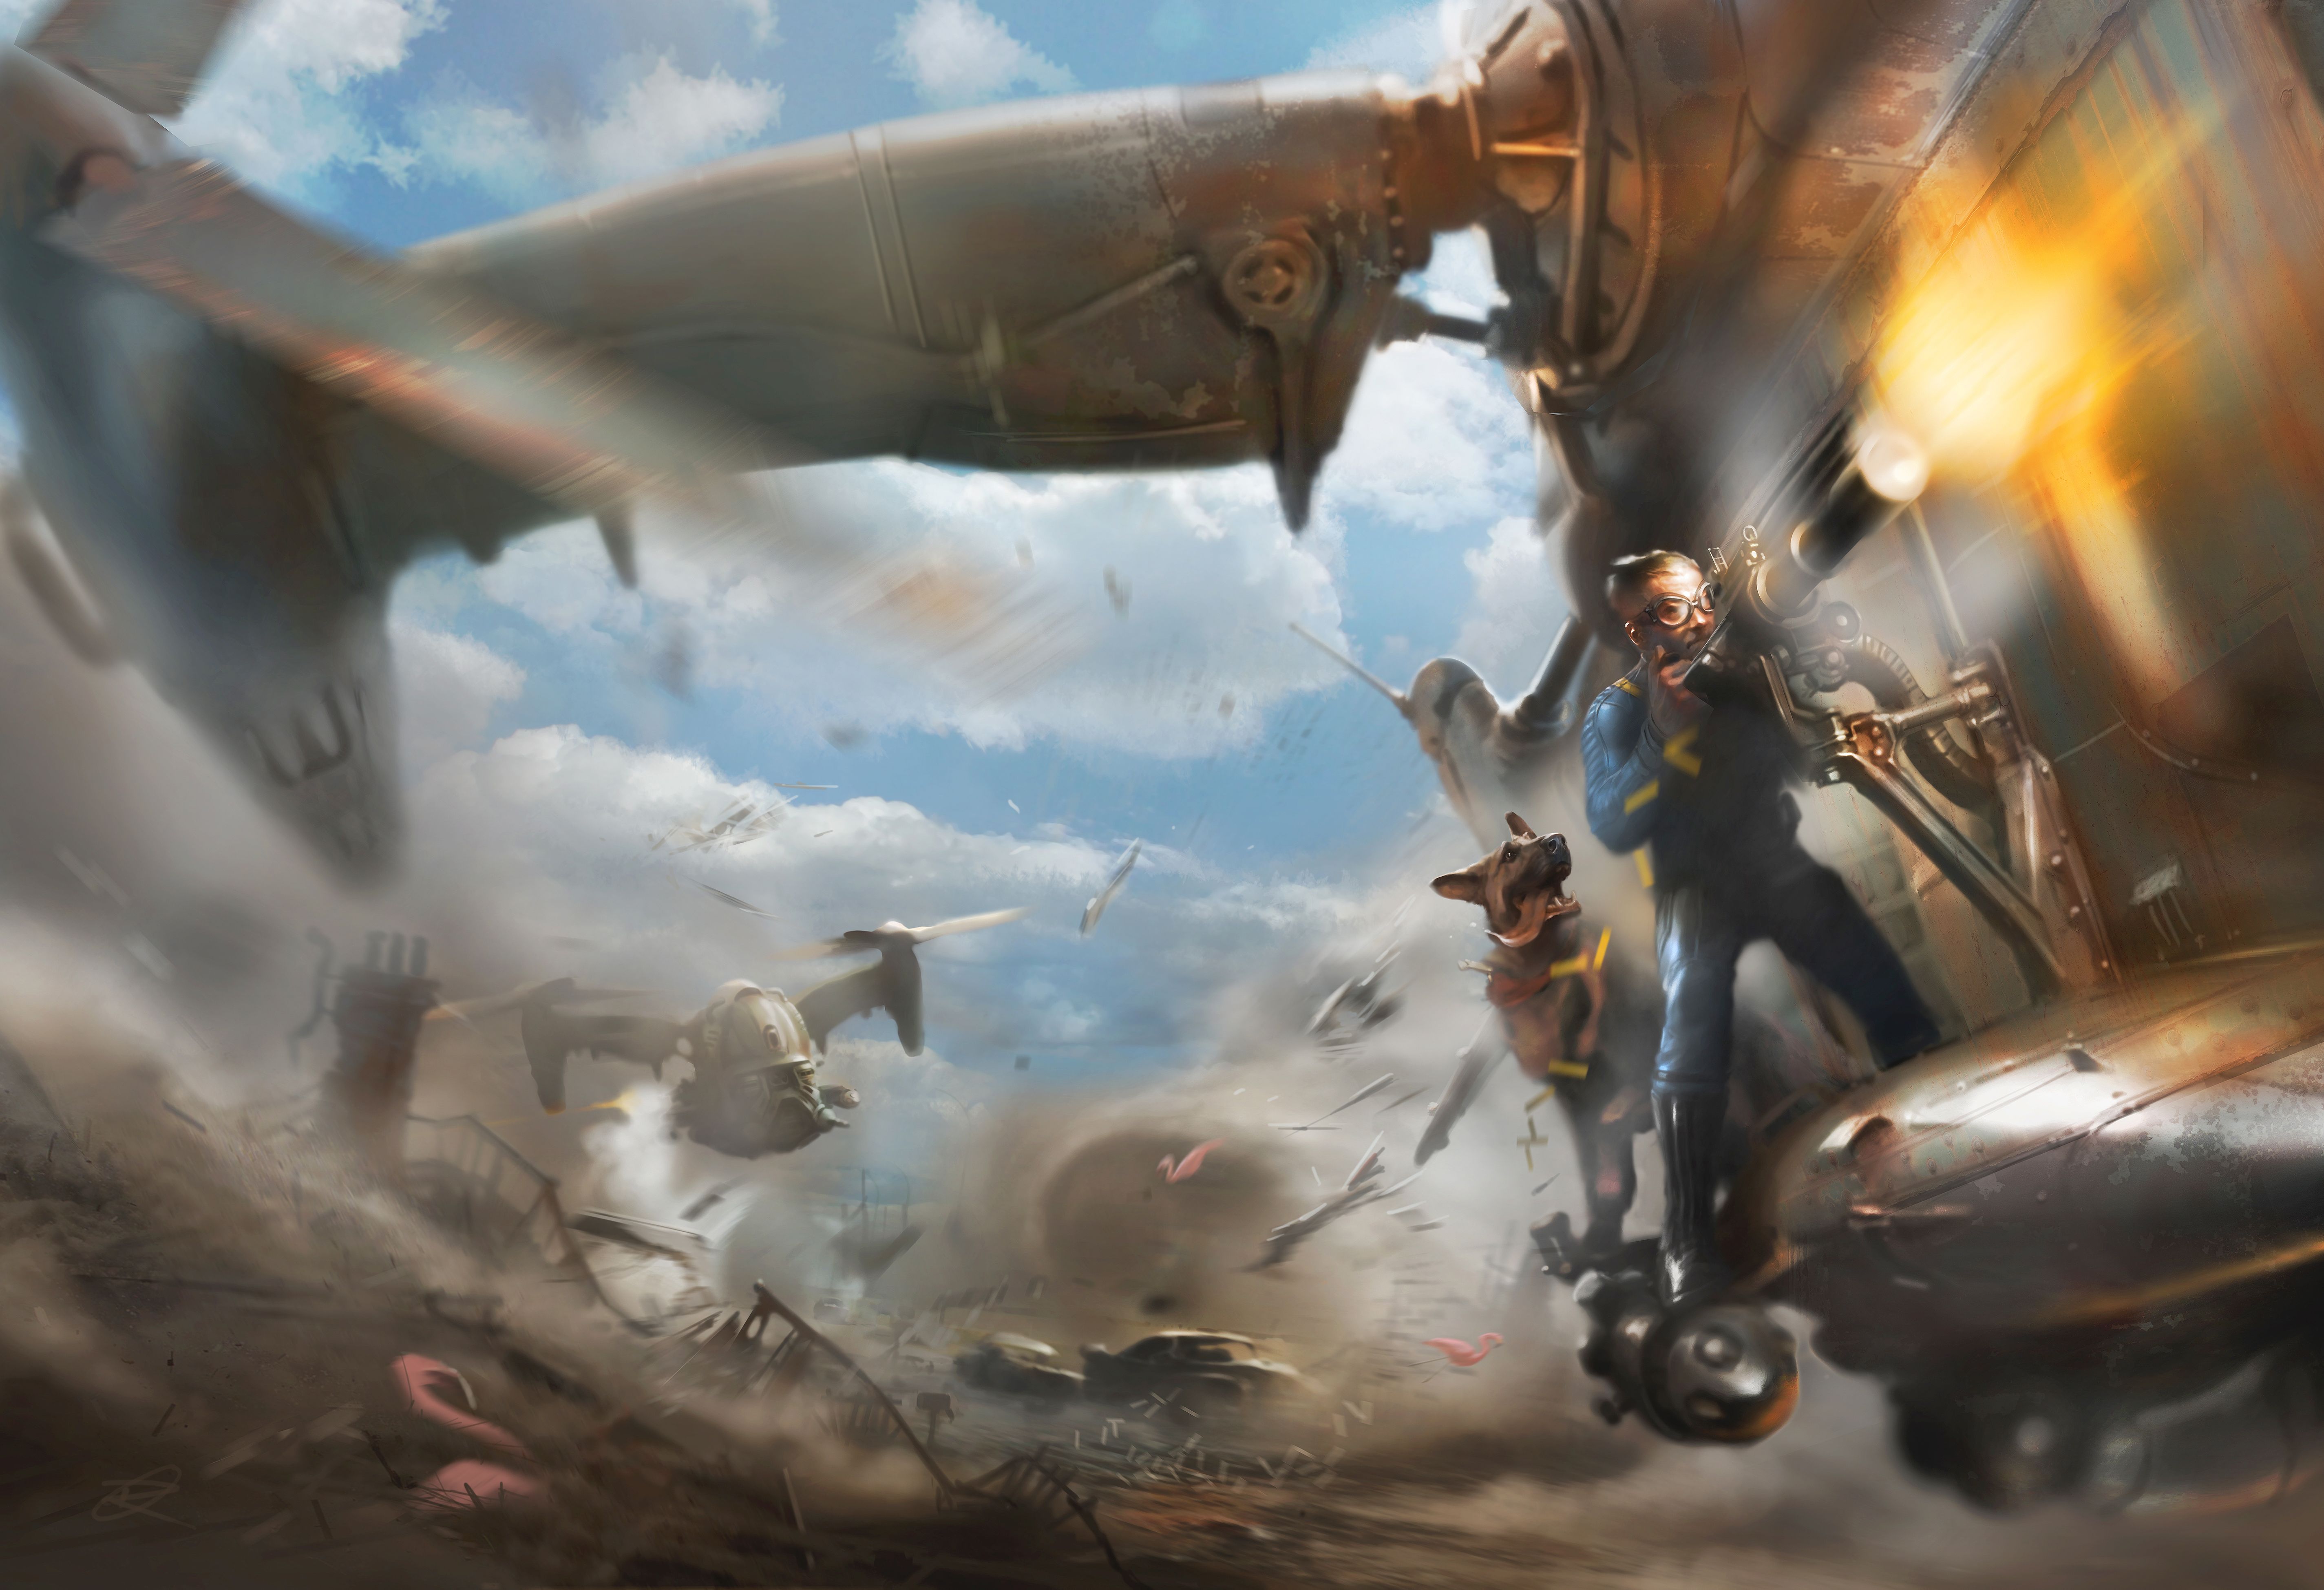 Fallout S Concept Art Is Wallpaper Worthy Polygon